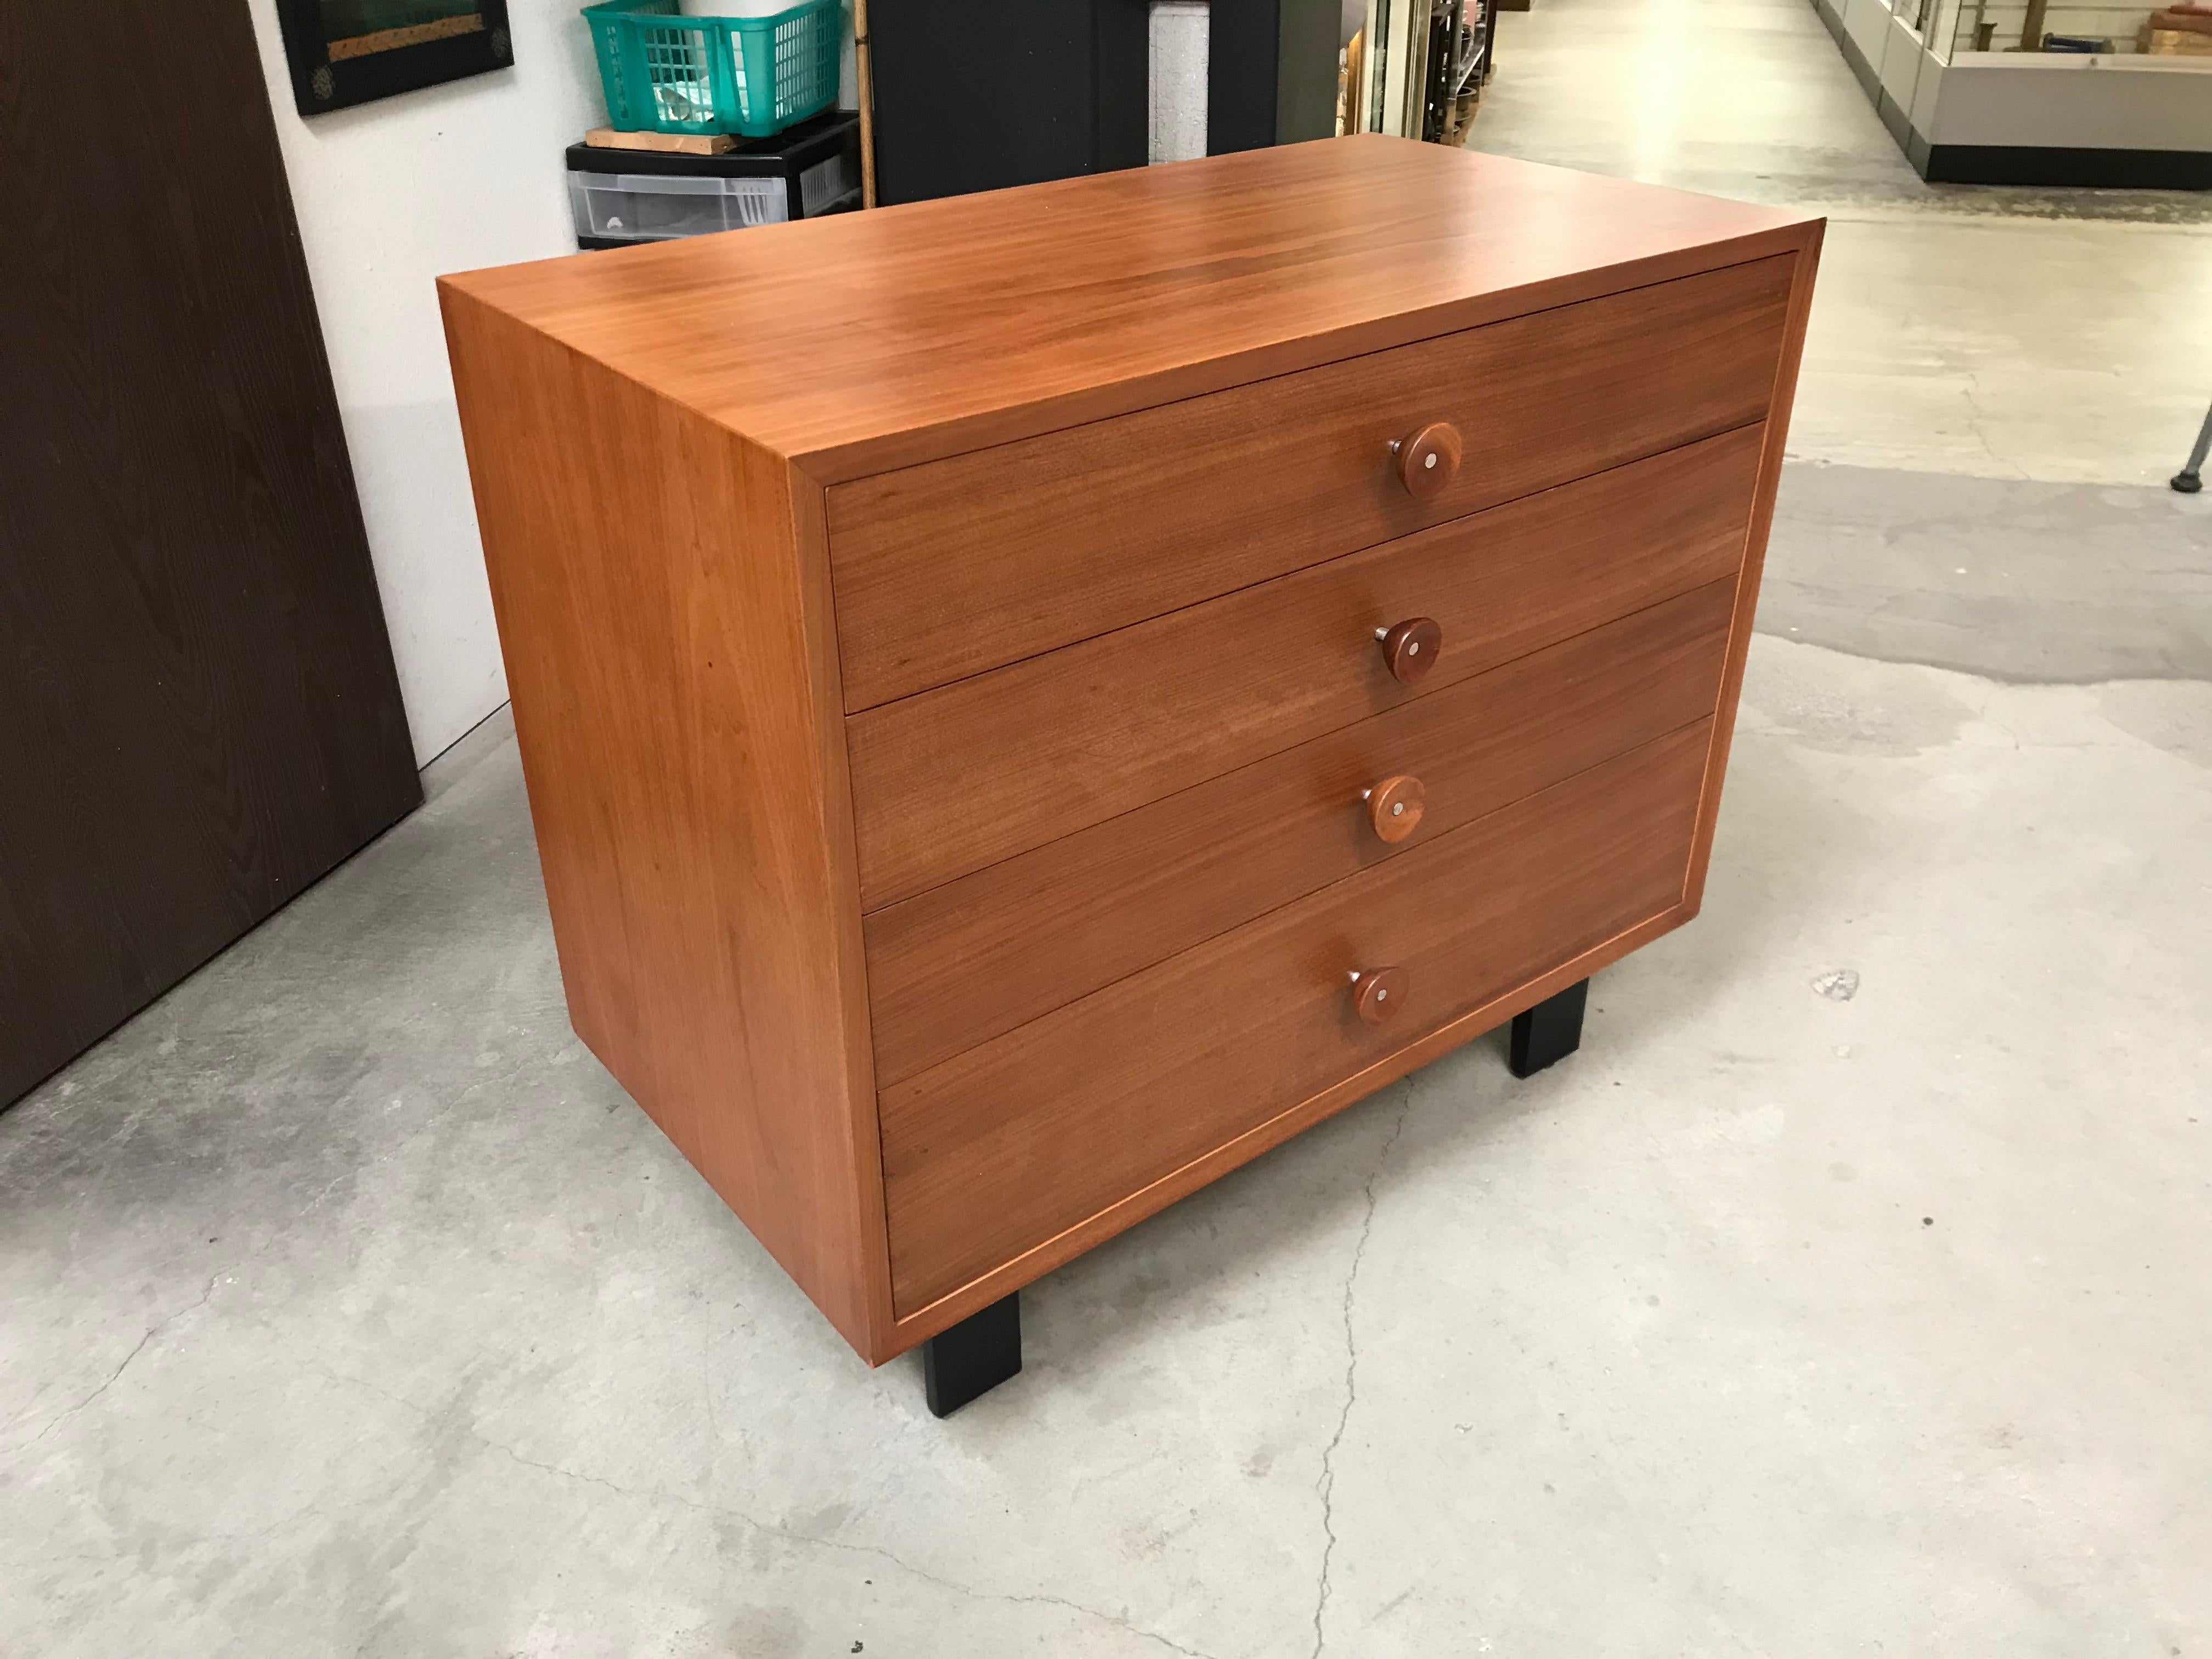 Classic mid century modern design.
Walnut veneer with solid wood legs and great round wood pulls.
Great for any occasion... 
